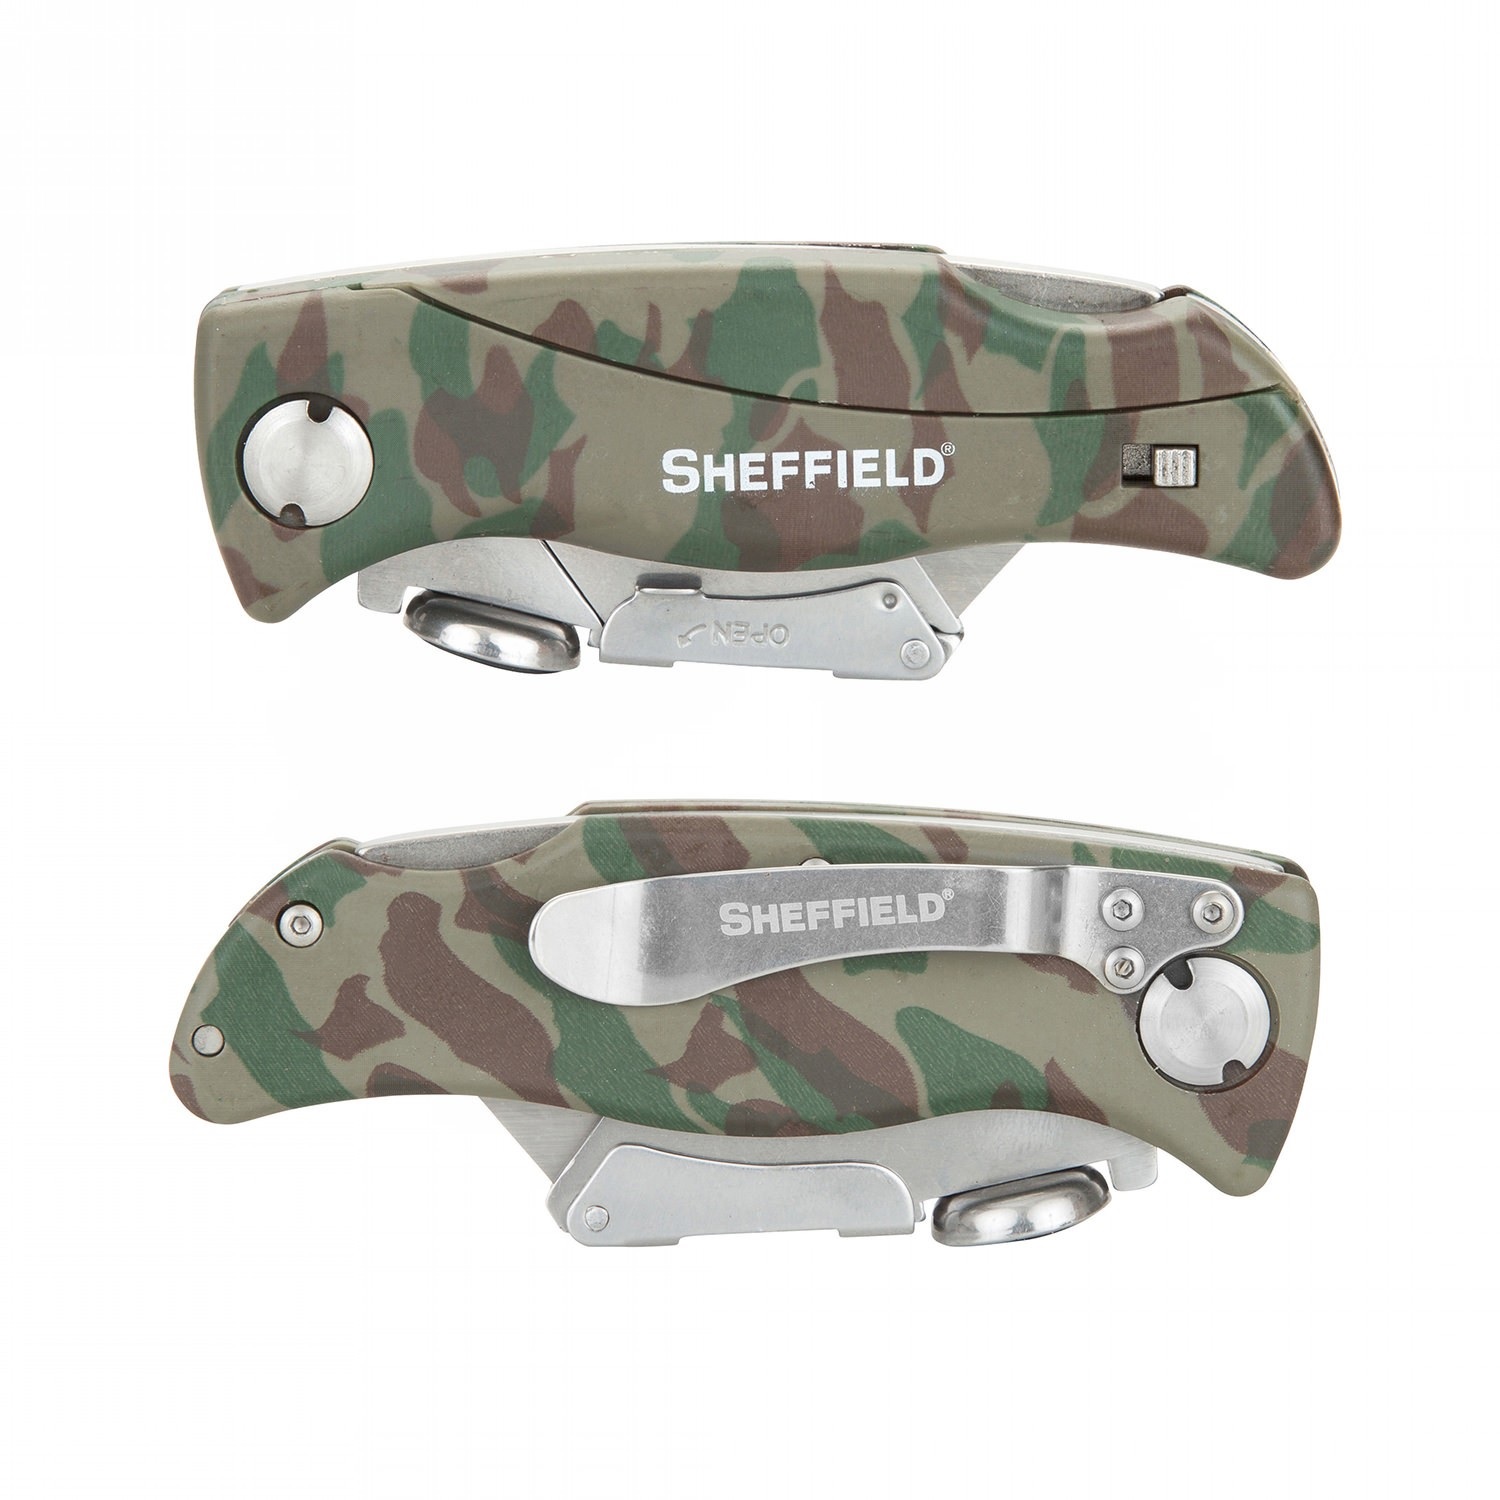 Sheffield Quick Change Utility Folder 2.5 in Blade Camo ABS - image 3 of 5